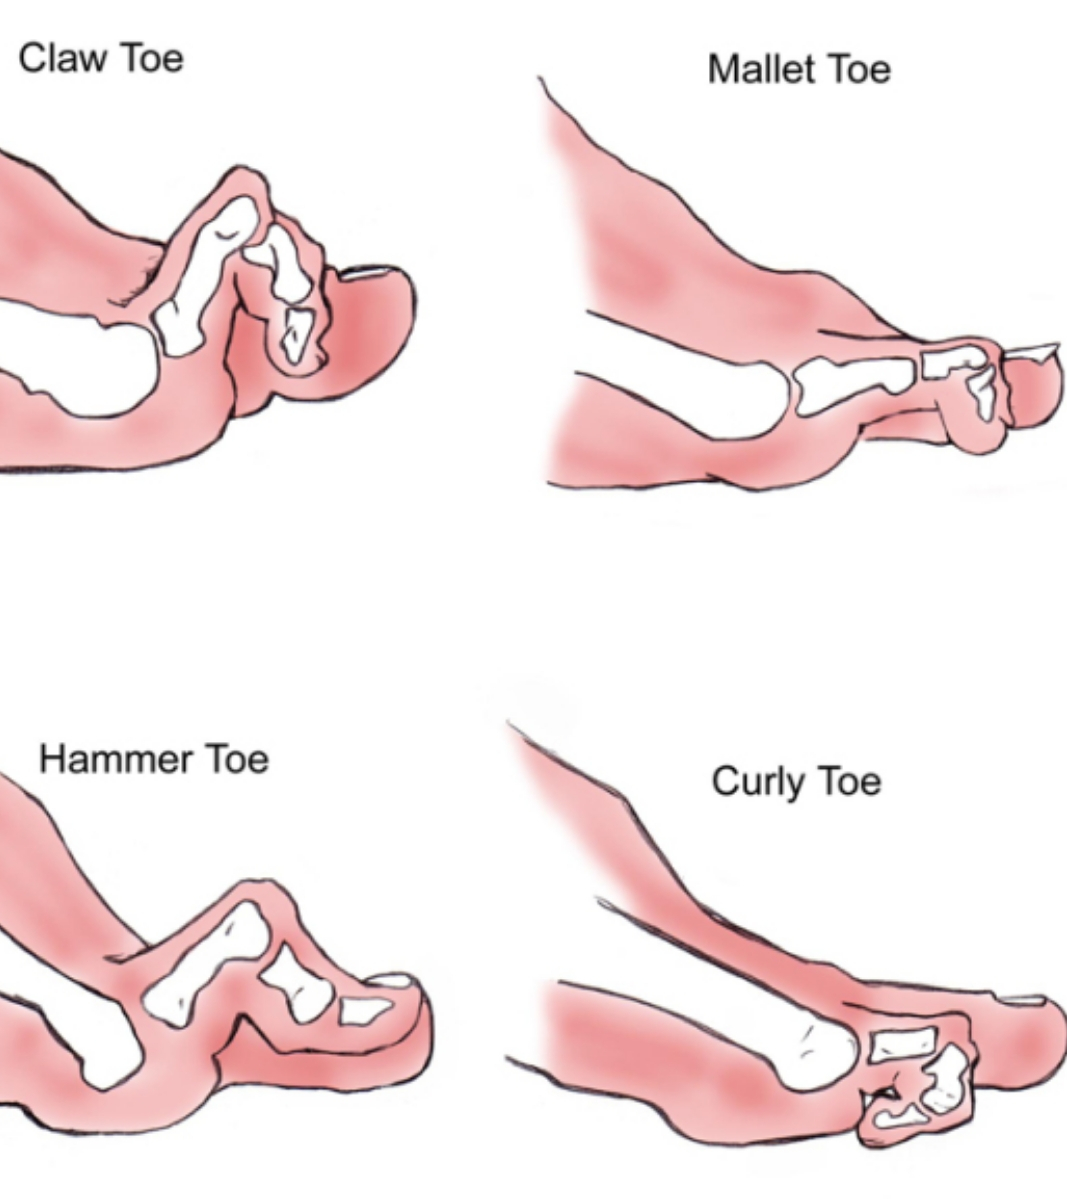 Hammer Claw and mallet toes